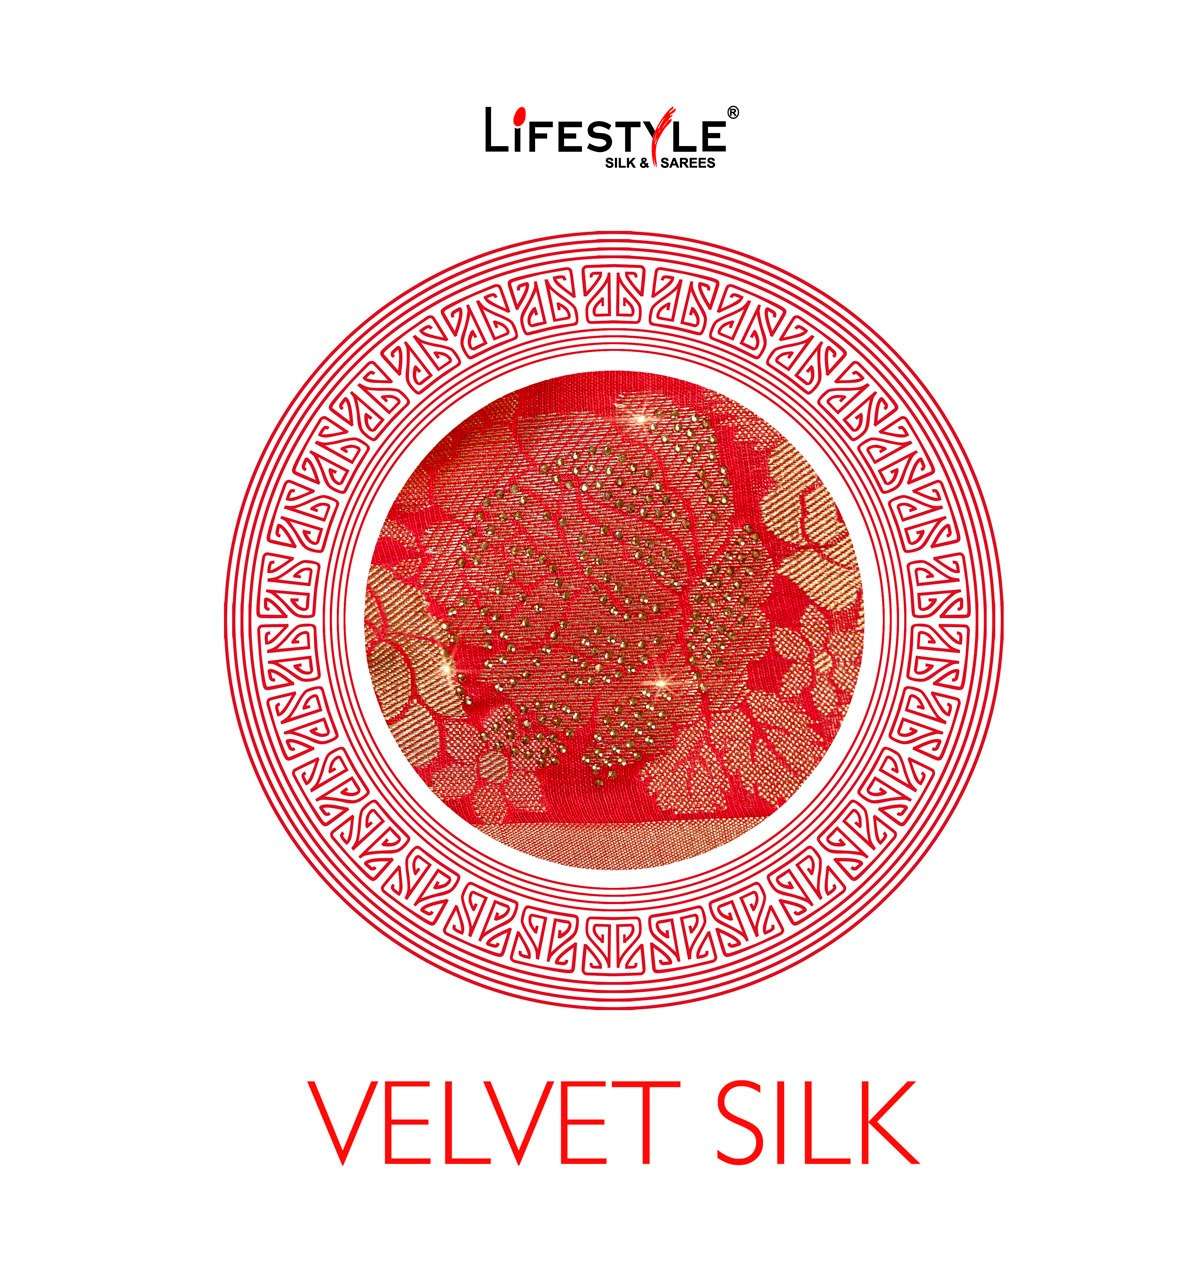 velvet silk vol 1 by lifestyle good looking raw silky fancy sarees